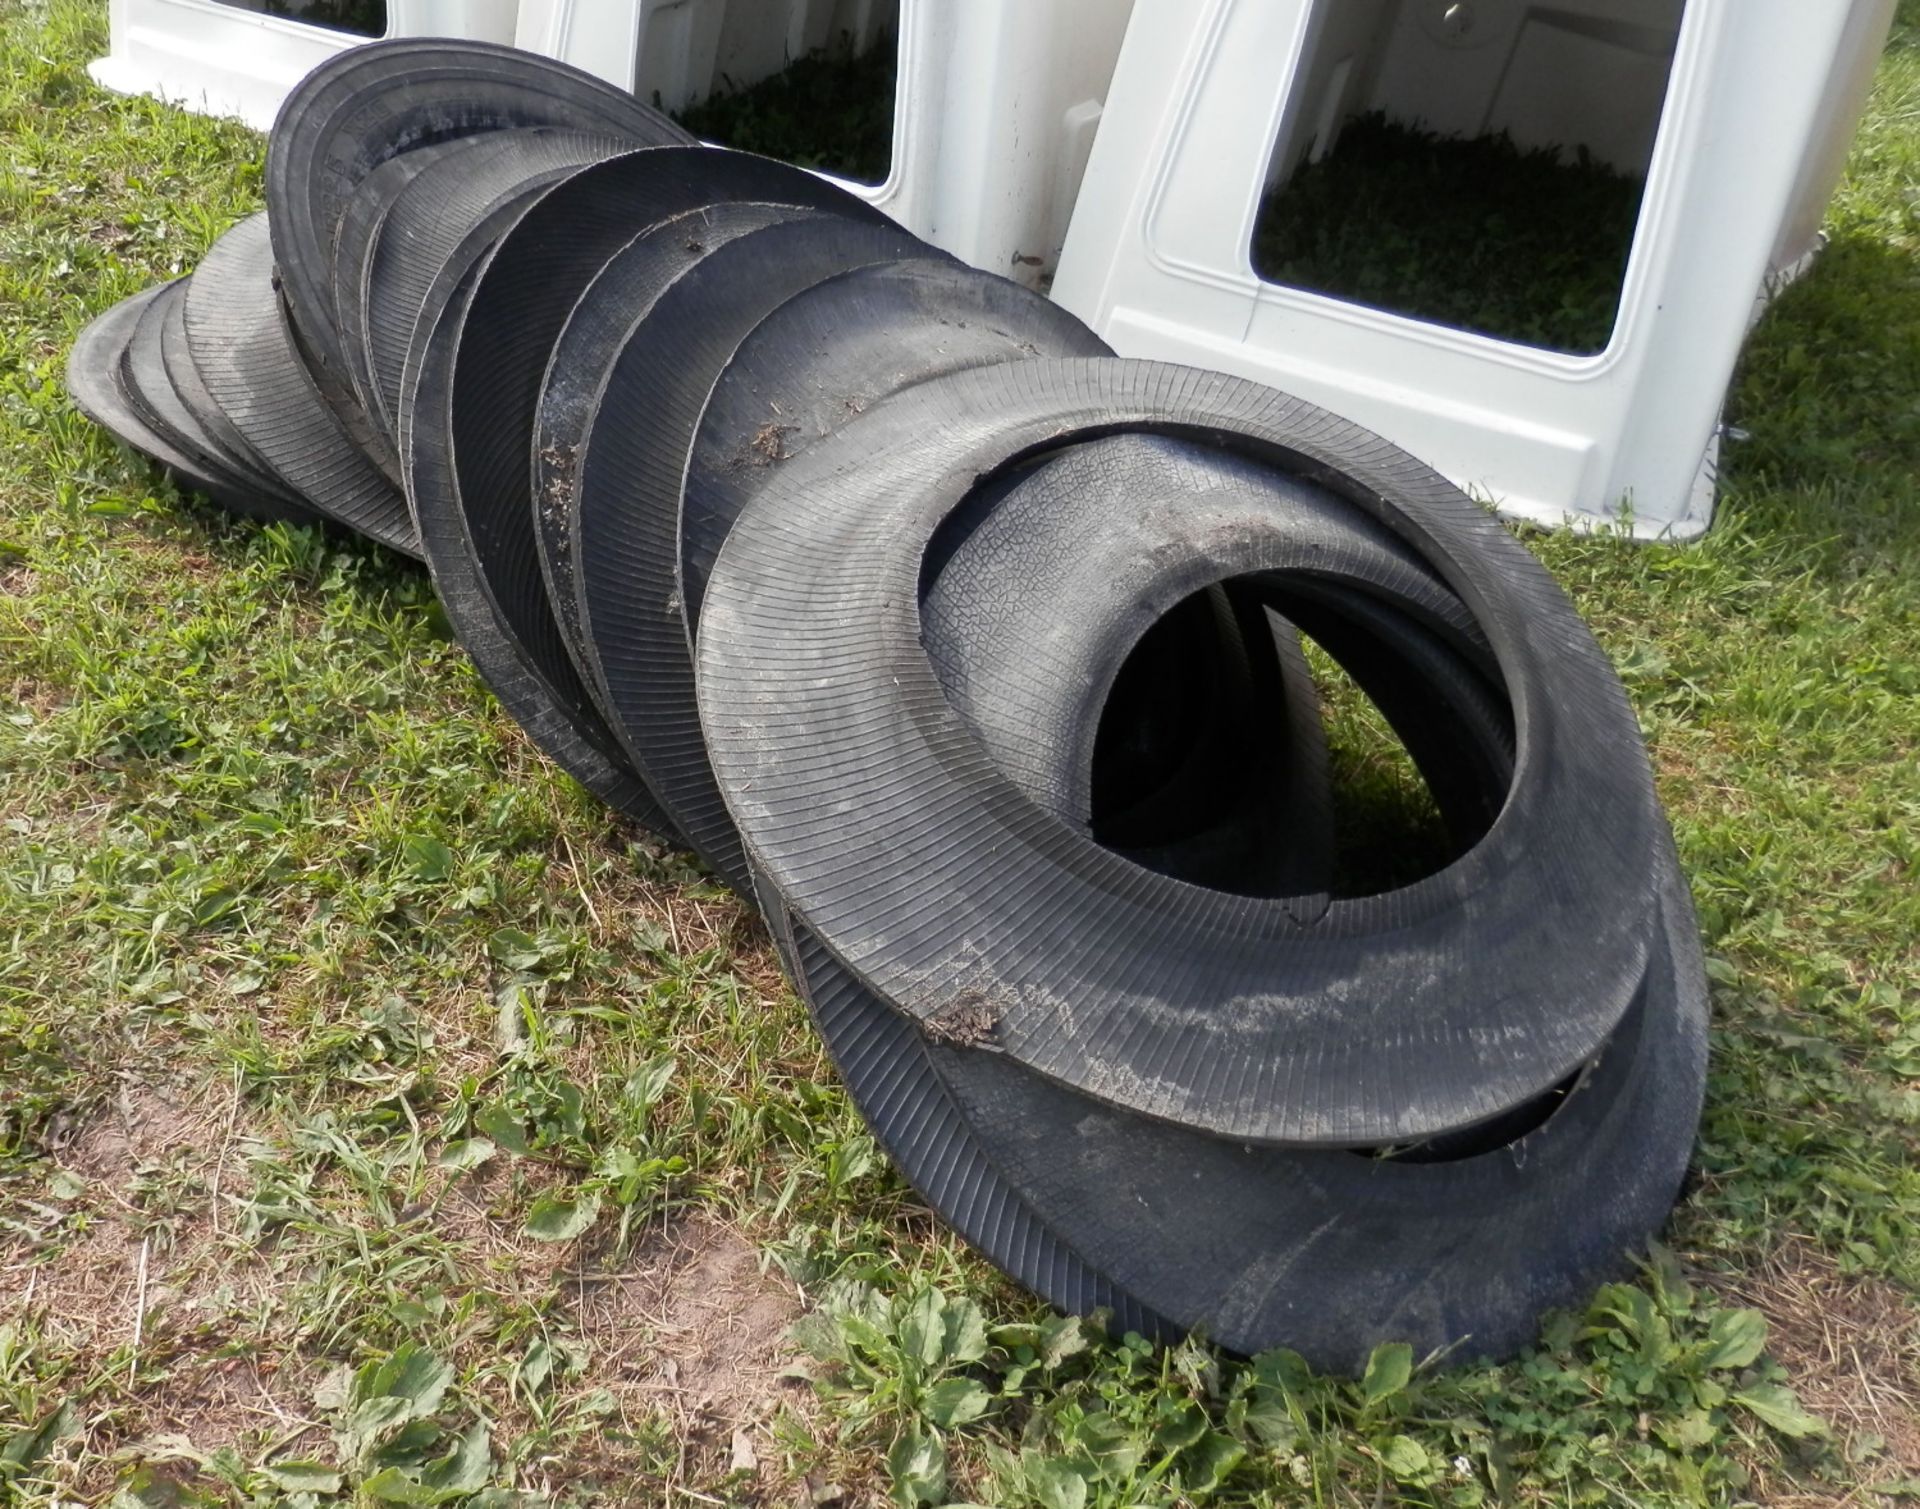 BUNKER TIRE SIDEWALLS, SOLD IN LOTS OF 300 (1800 available)